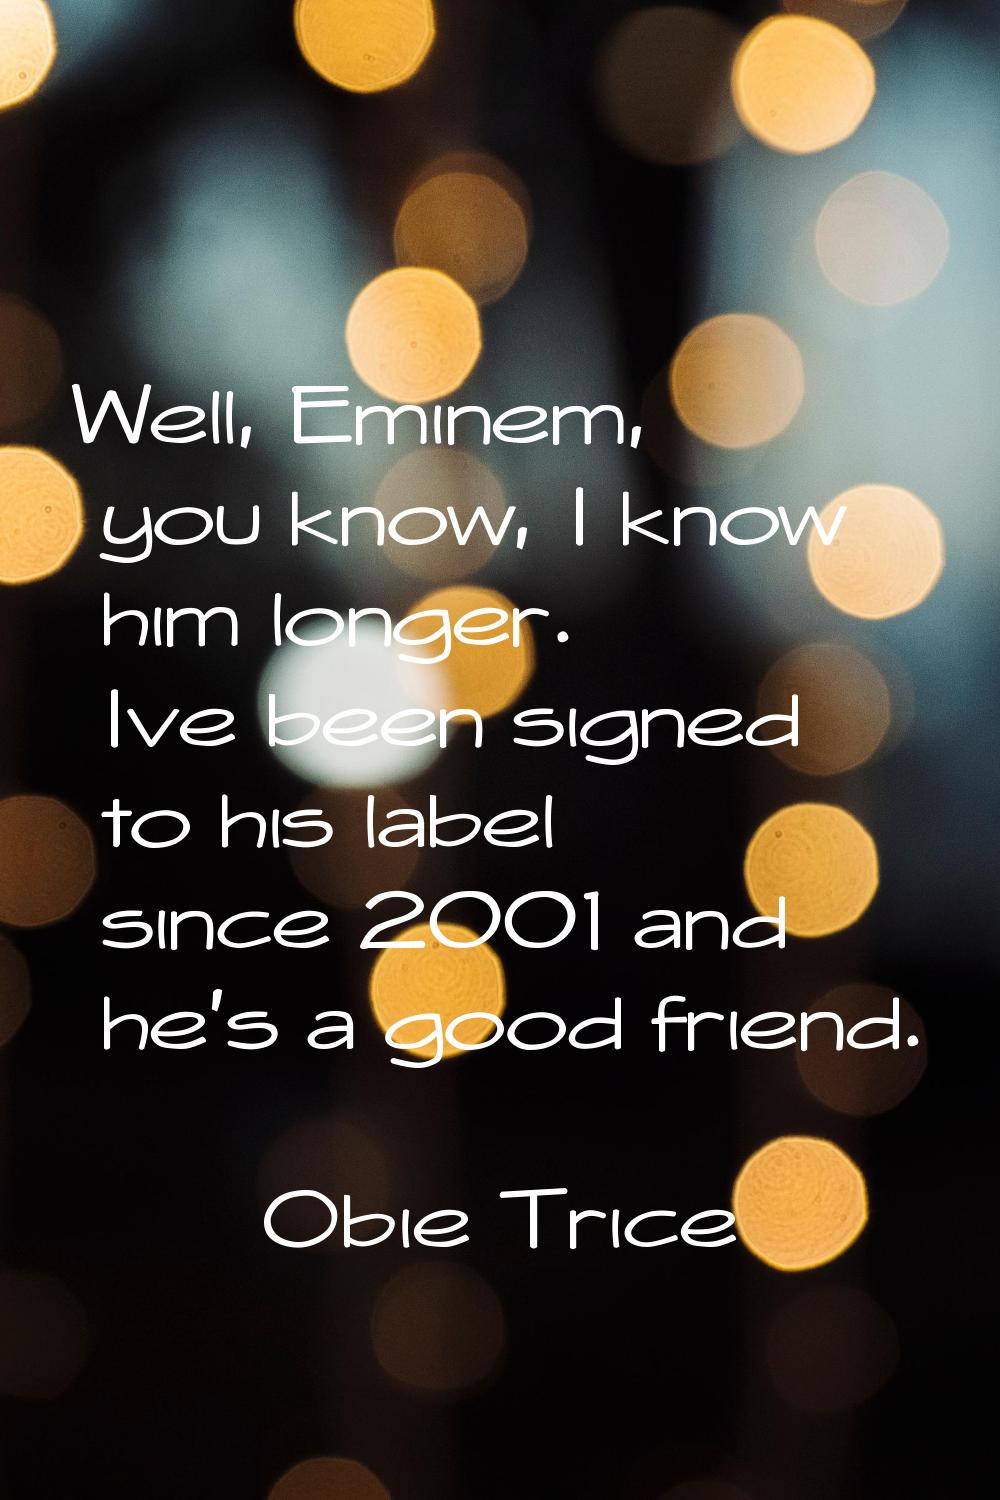 Well, Eminem, you know, I know him longer. Ive been signed to his label since 2001 and he's a good 